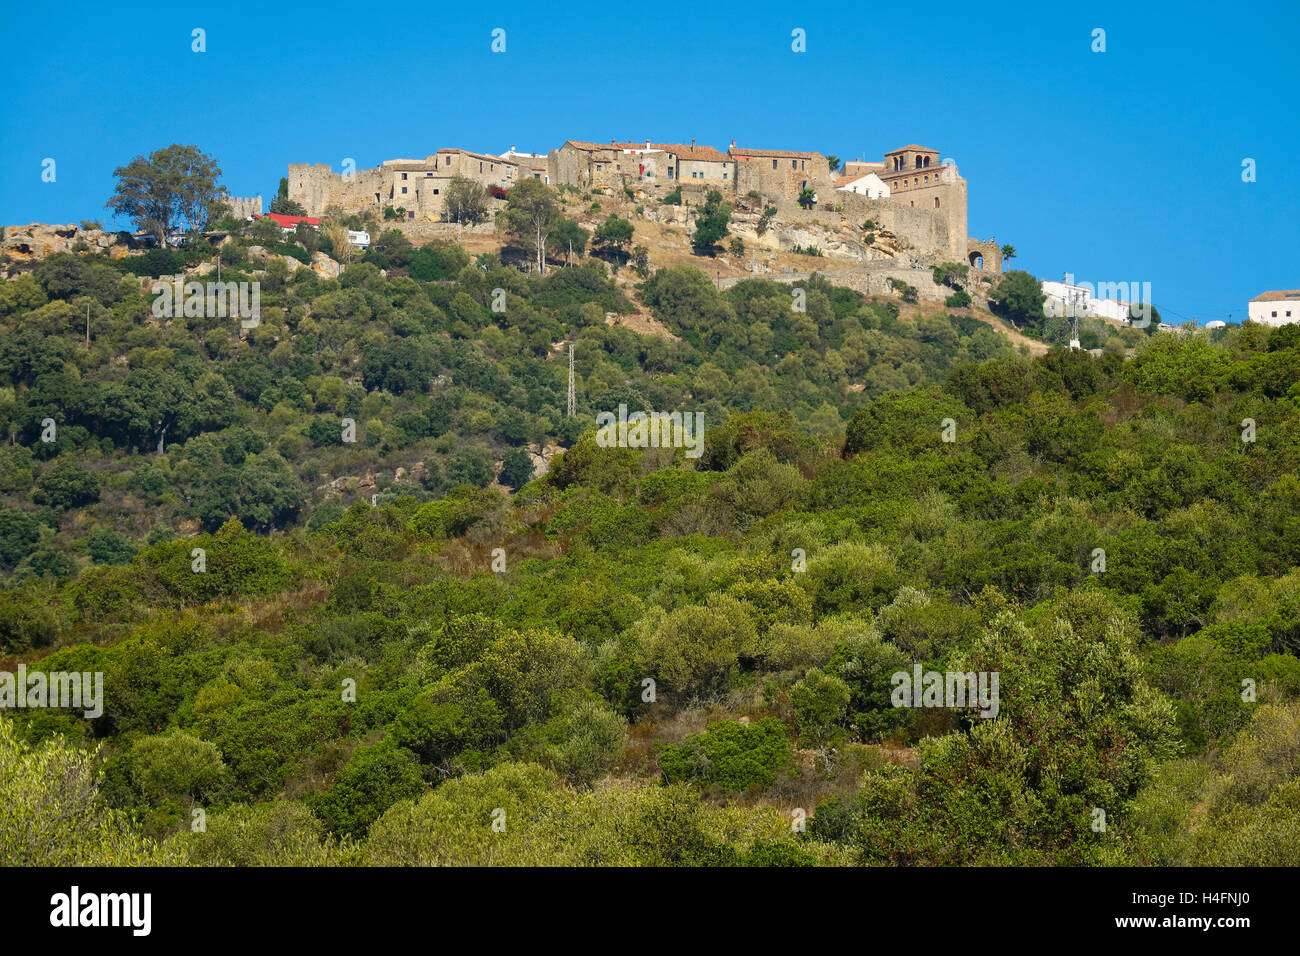 Castellar de la Frontera, Cadiz Province, Andalusia, southern Spain.  The walled old town. Stock Photo